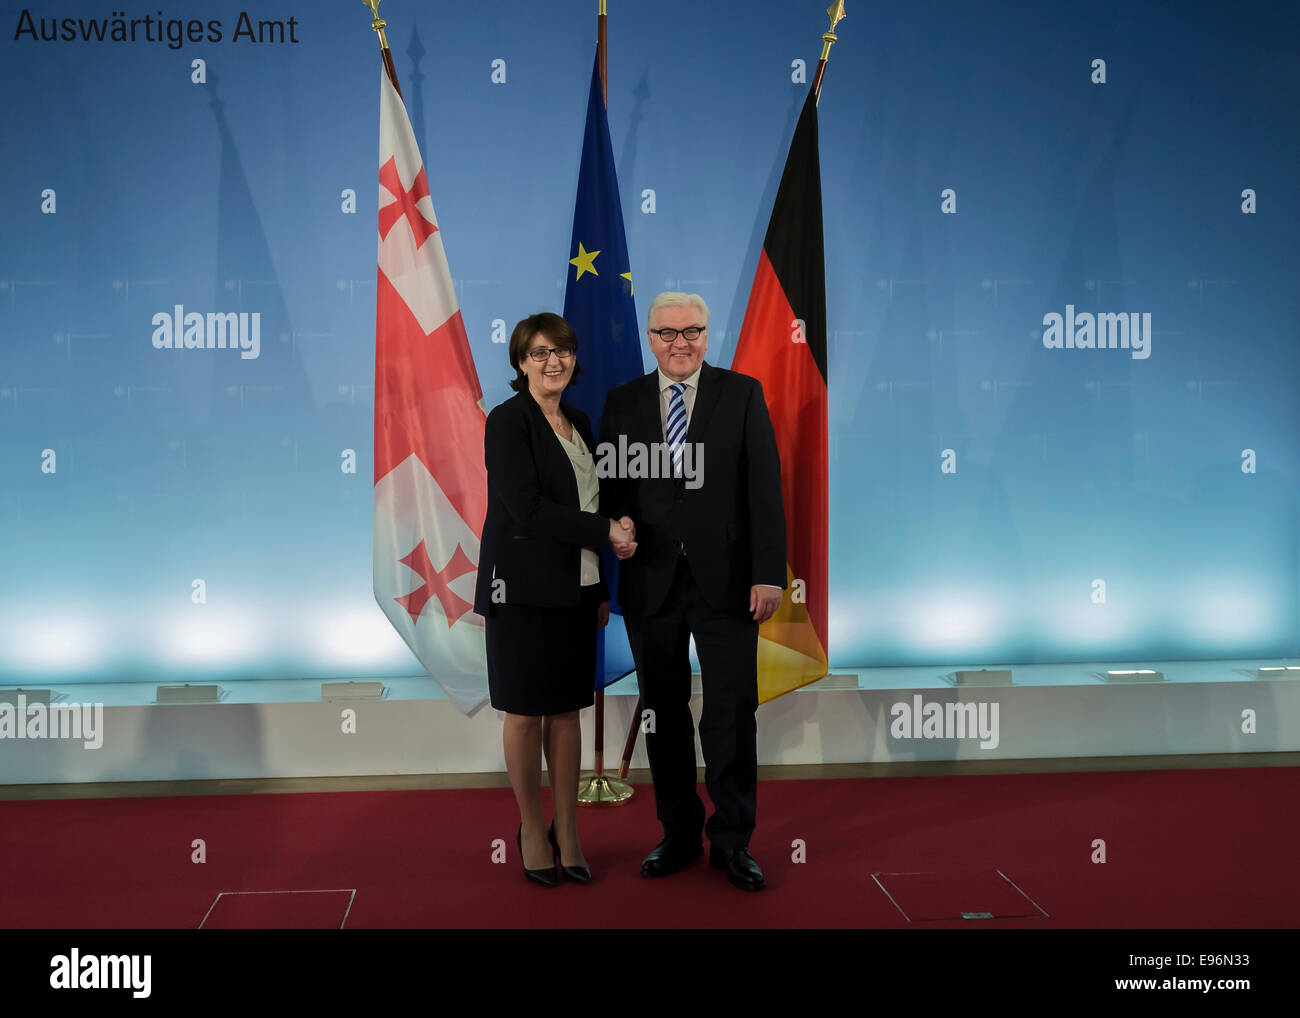 Berlin, Germany. 21st Oct, 2014. German foreign Minister Steinmeier meets Georgian Foreign Minister Maia Panjikidze to talk about relations of Georgia with Germany and the European union stands for center of the discussion as well as the Ukraine crisis at German foreign Ministery on October 21st, 2014 in Berlin, Germany. / Picture:  Maia Panjikidze, Georgian Foreign Minister, and Frank-Walter Steinmeier (SPD), German Foreign Minister. Credit:  Reynaldo Chaib Paganelli/Alamy Live News Stock Photo